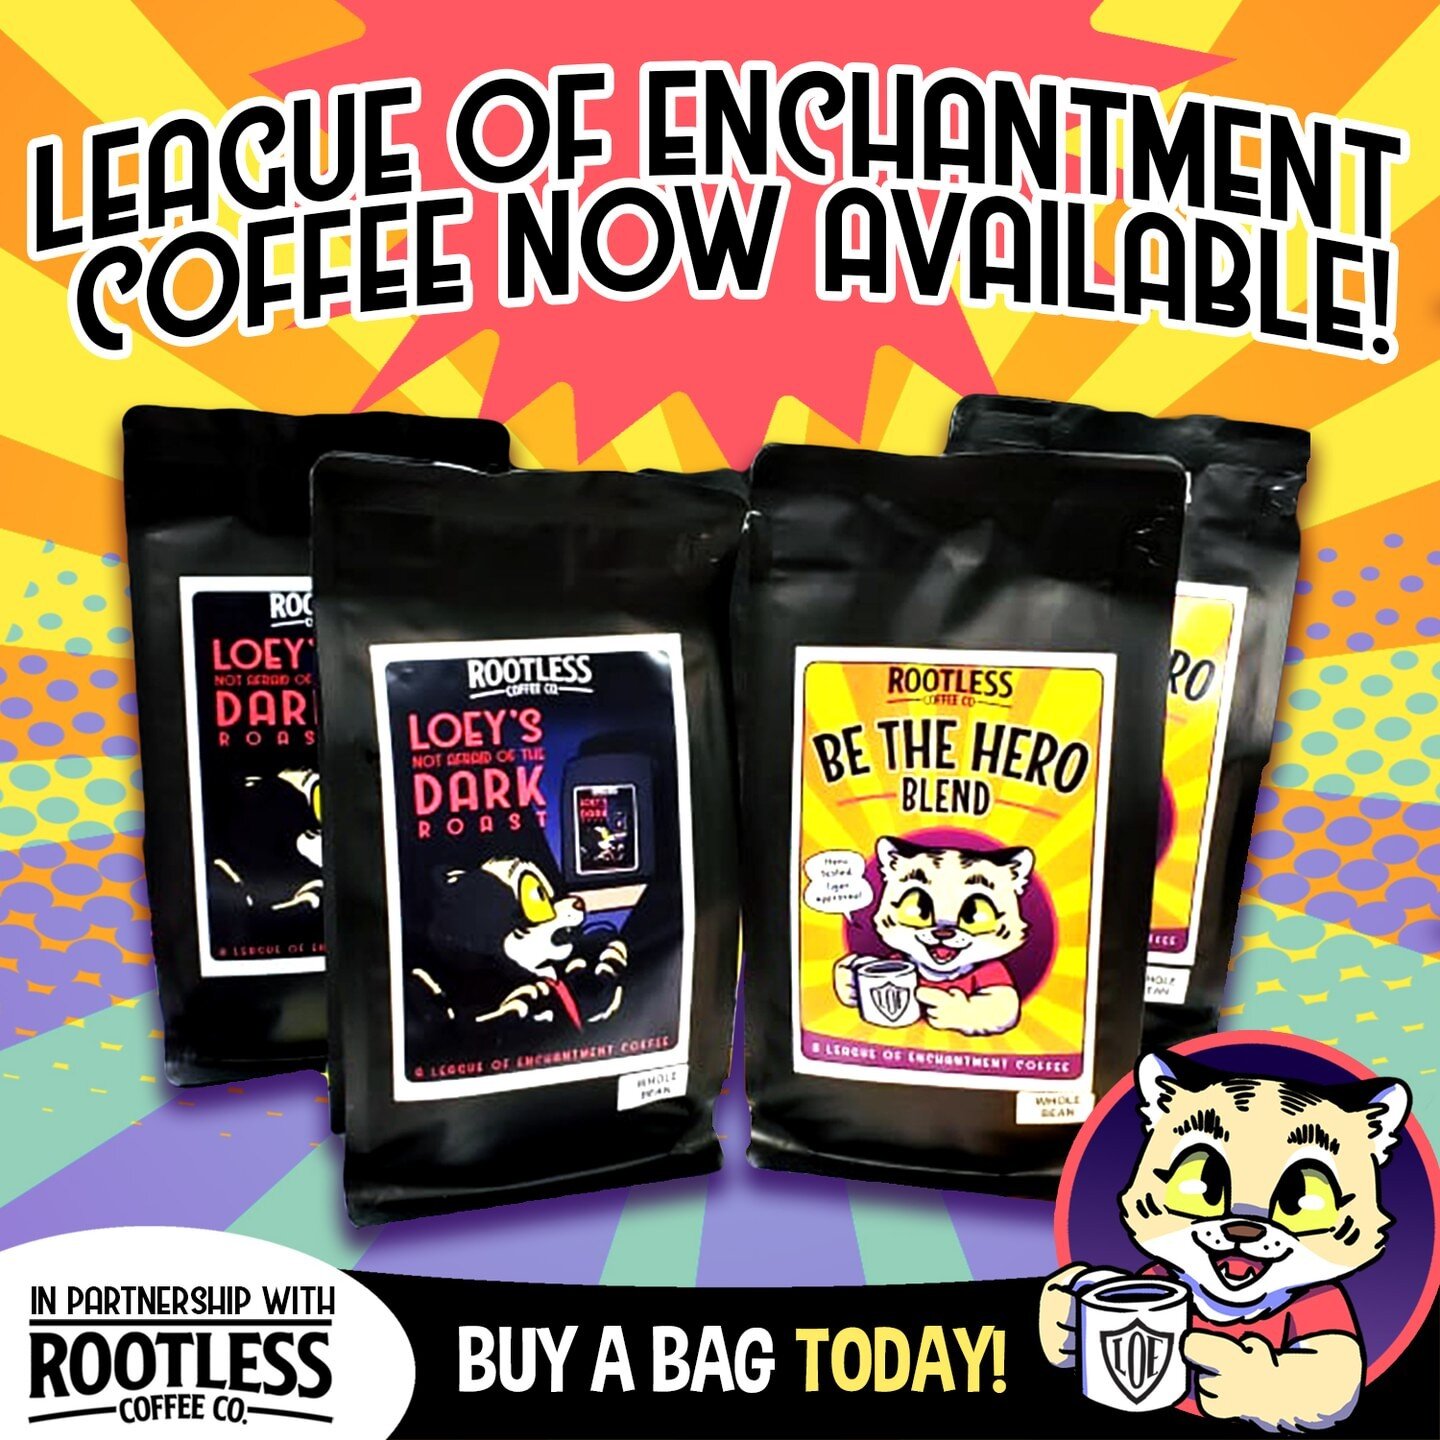 You shuffle out of bed, and you slowly walk to the kitchen. 
&ldquo;AWAKEN!&rdquo; Screams the coffee pot, the alluring aroma of the coffee bean fills your senses. You smile as you realize it is League of Enchantment coffee. Drinking delicious coffee